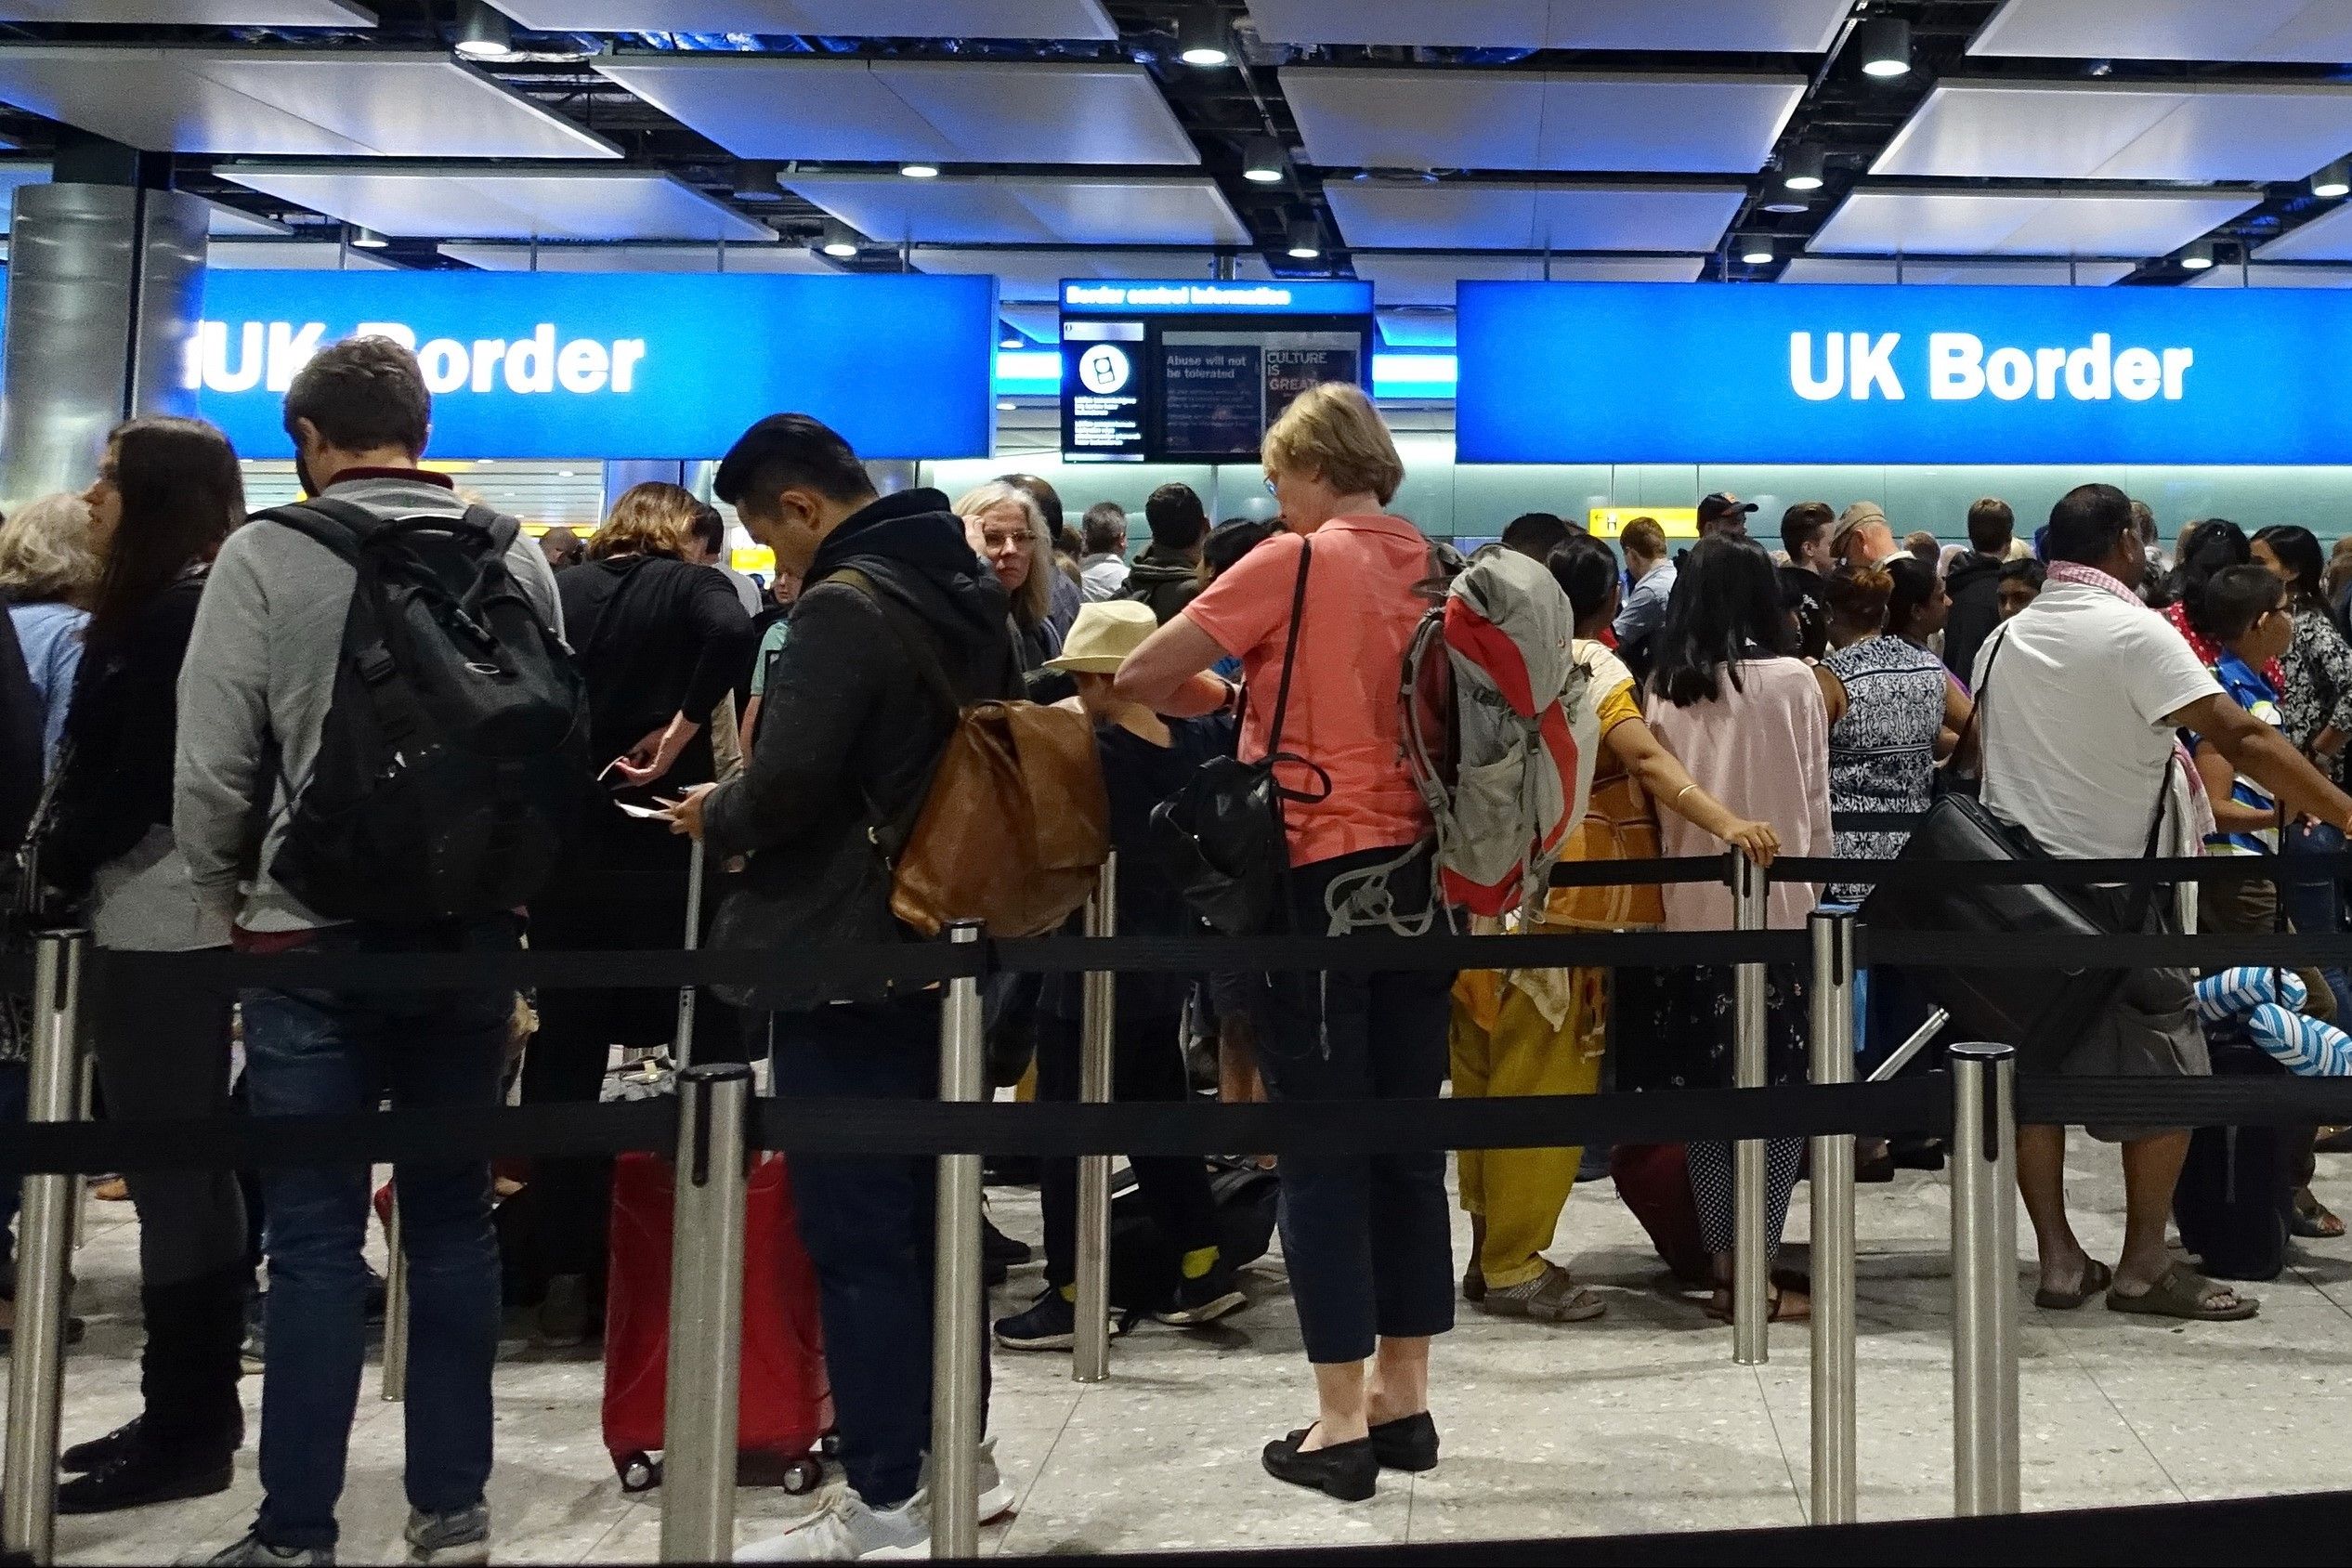 Passengers queuing at London Heathrow Airport